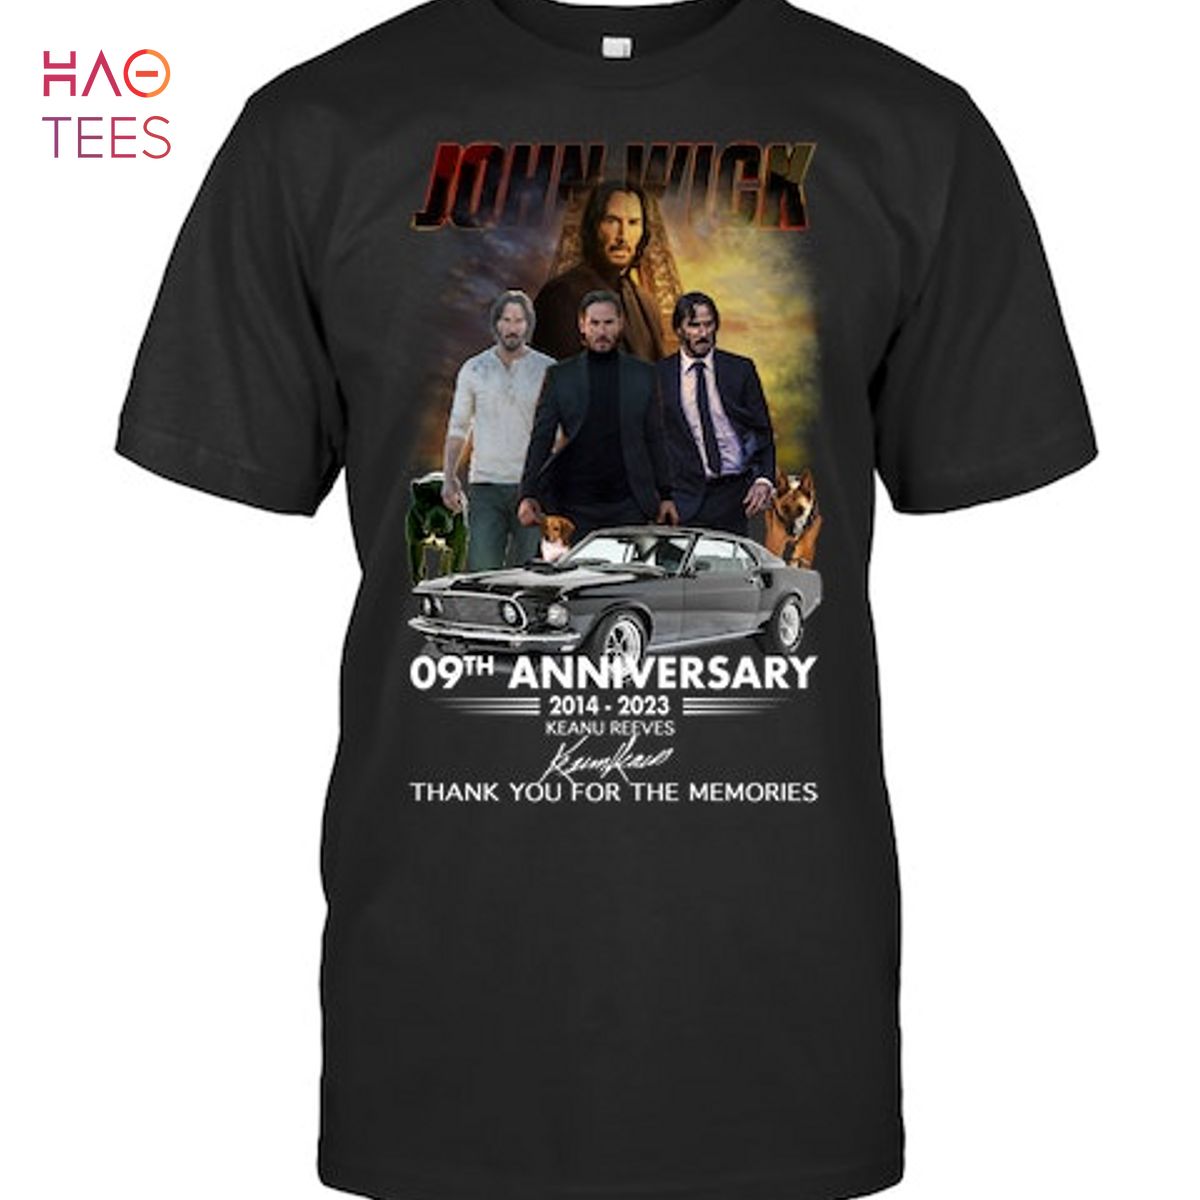 John Wick 9 Anniversary 2014 2023 Keanu Reeves Thank You For The Memories T-Shirt